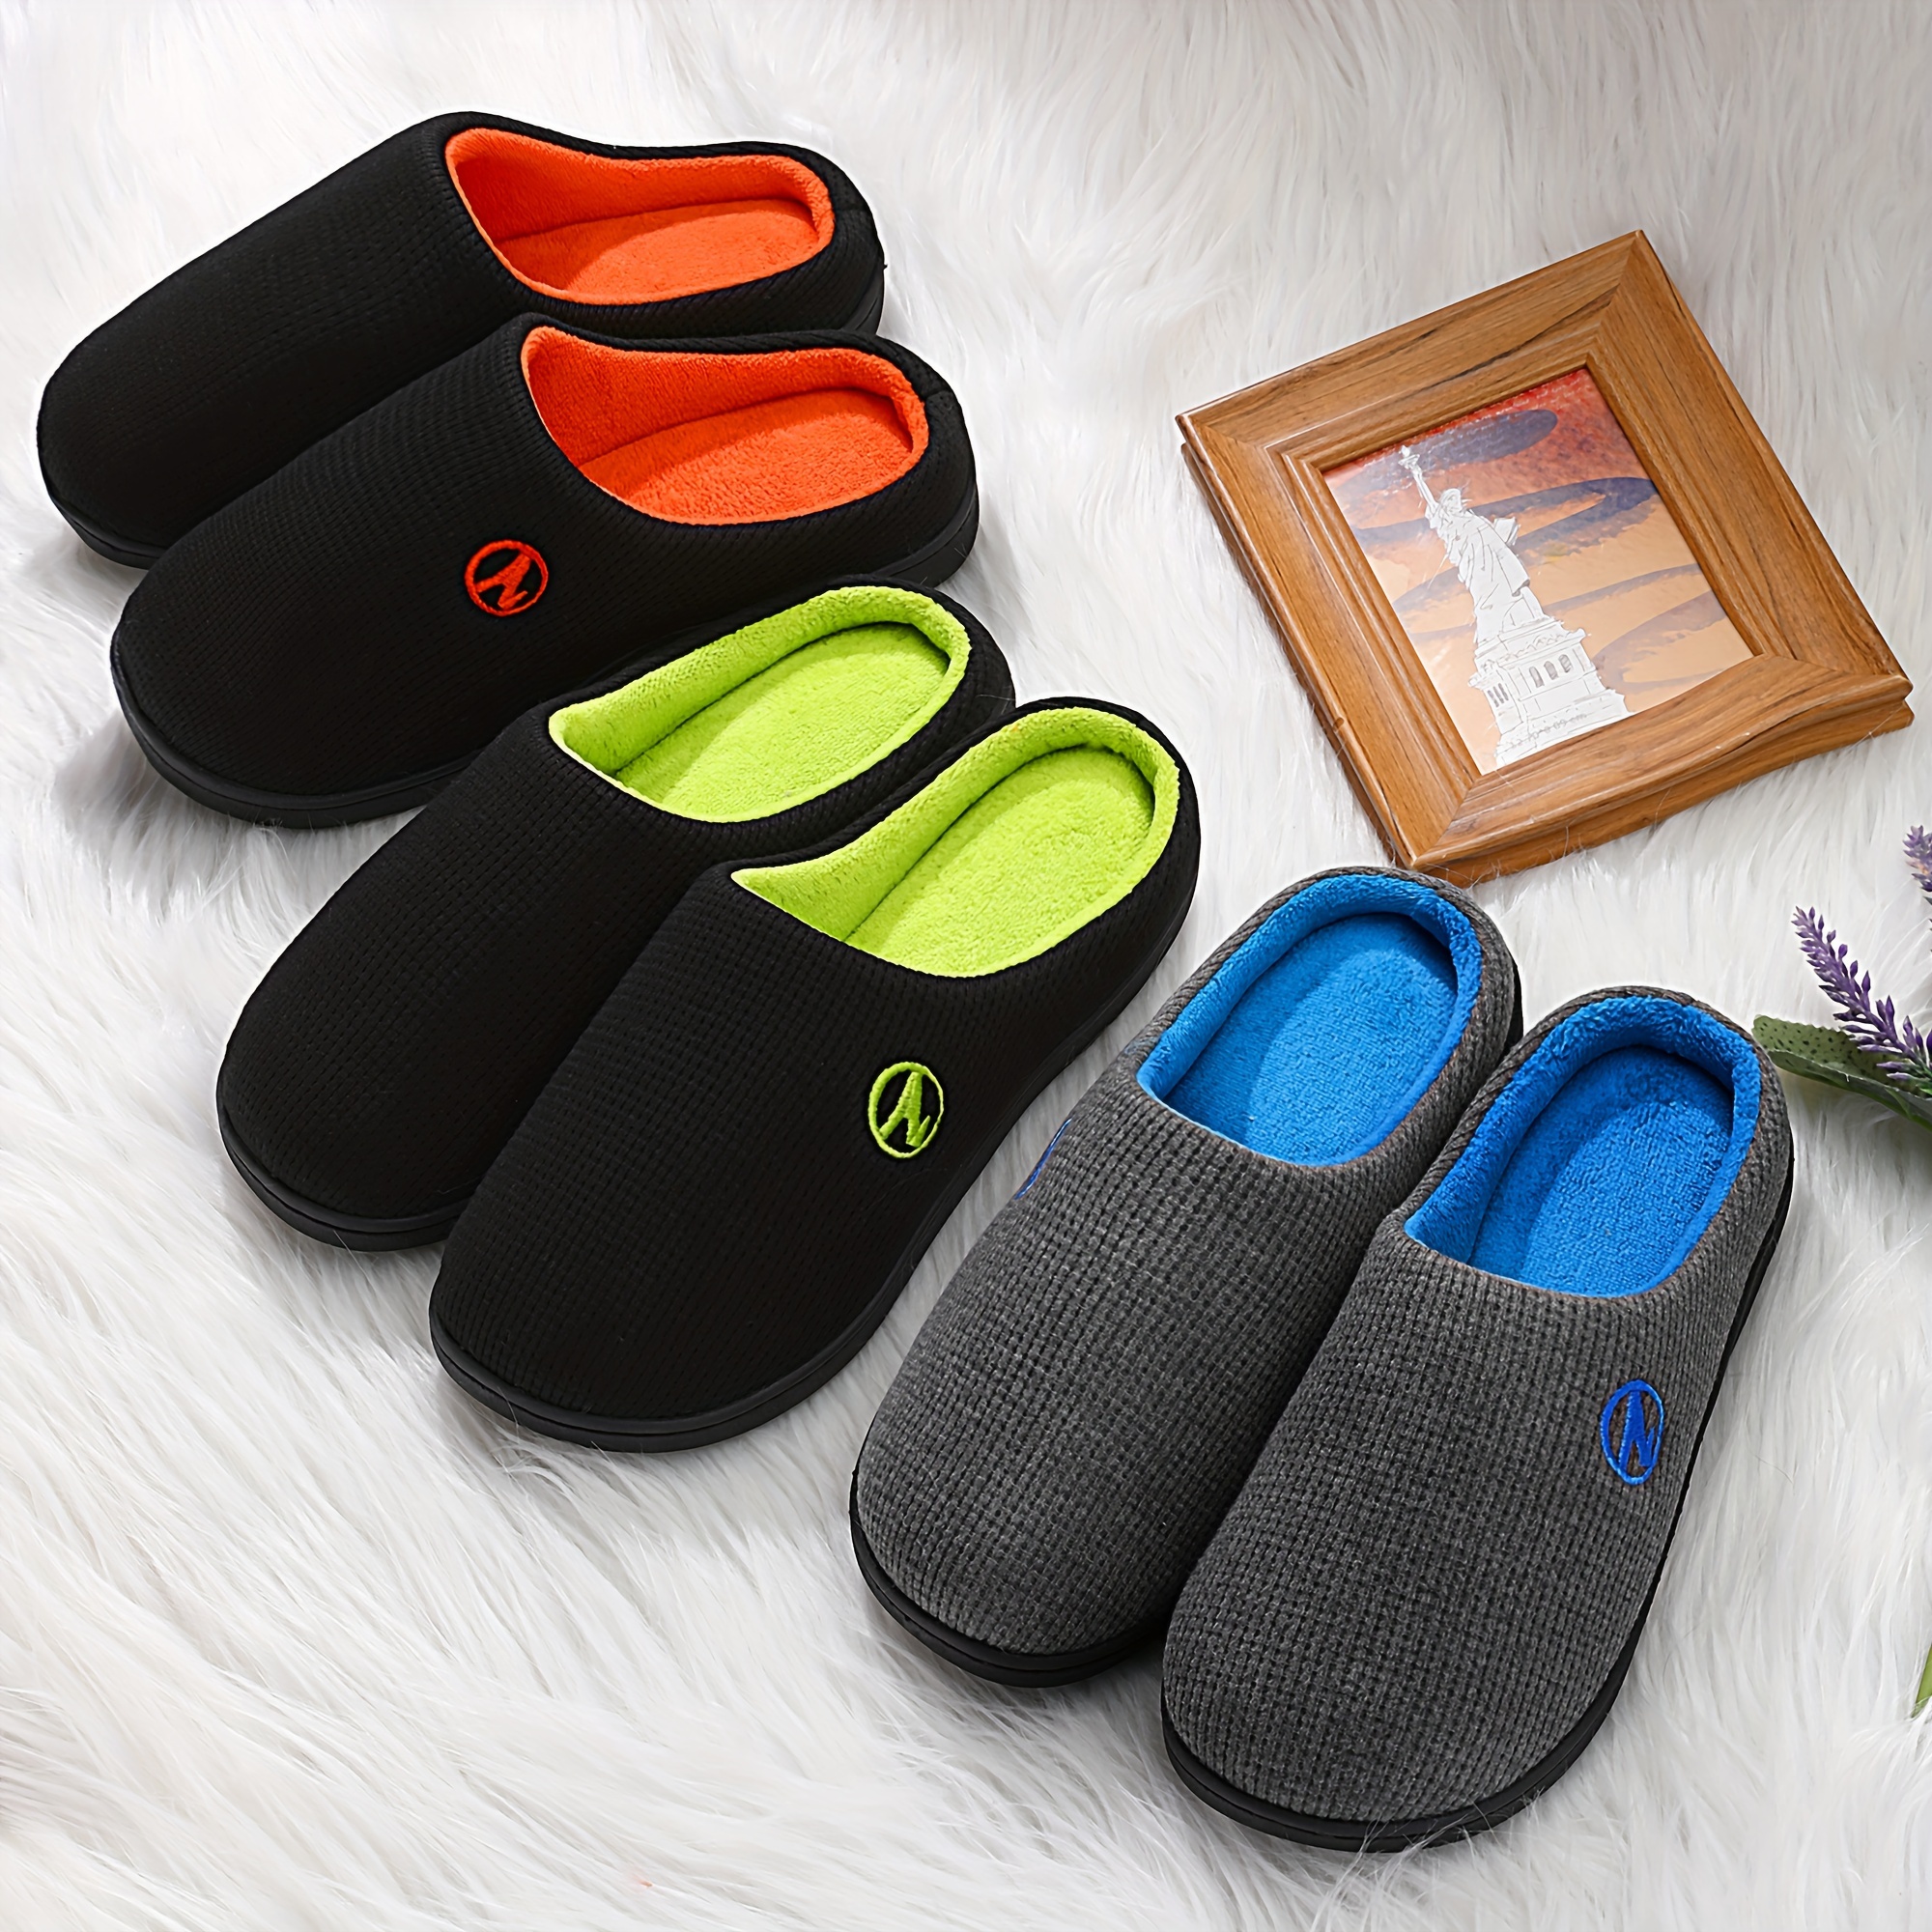 

Men's Home Shoes Anti Slip Memory Foam Slipper For Indoor Walking, Spring Autumn And Winter